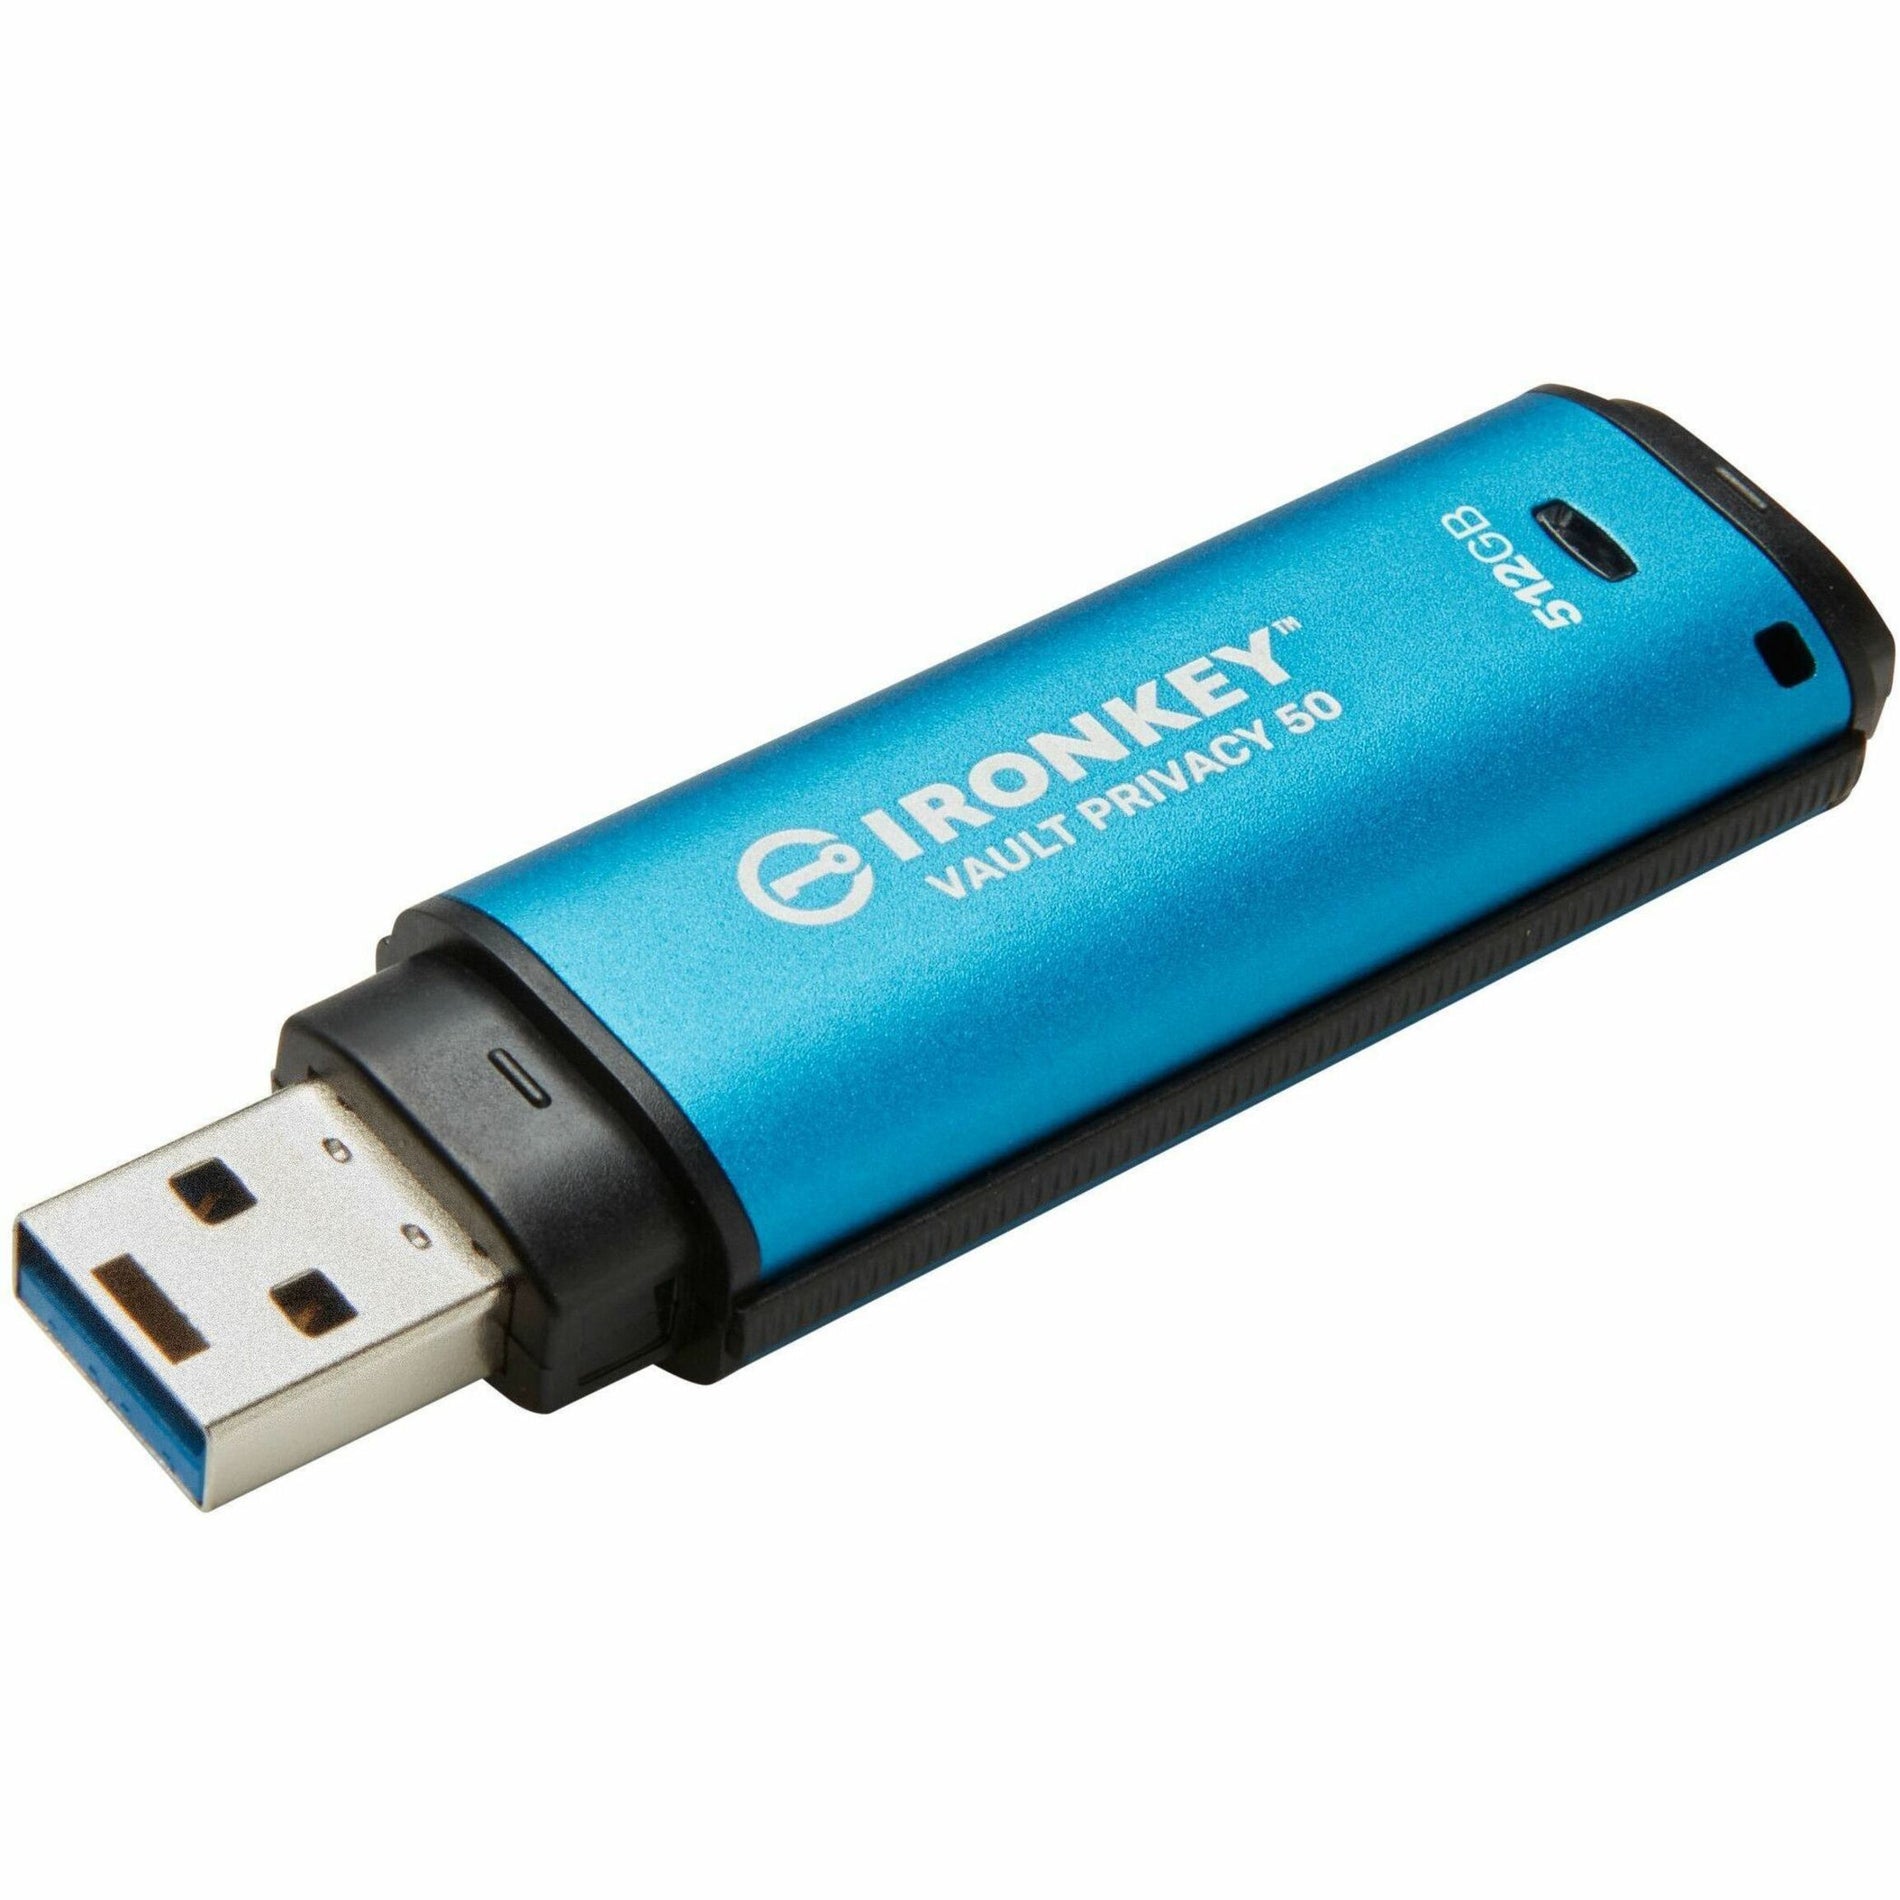 IronKey IKVP50/512GB Vault Privacy 50 Series 512GB USB 3.2 (Gen 1) Type A Flash Drive, Brute Force Self Destruct, Cap, Admin and User Mode, Read-only Mode, Password Protection, Cryptographic Erase, Water Proof